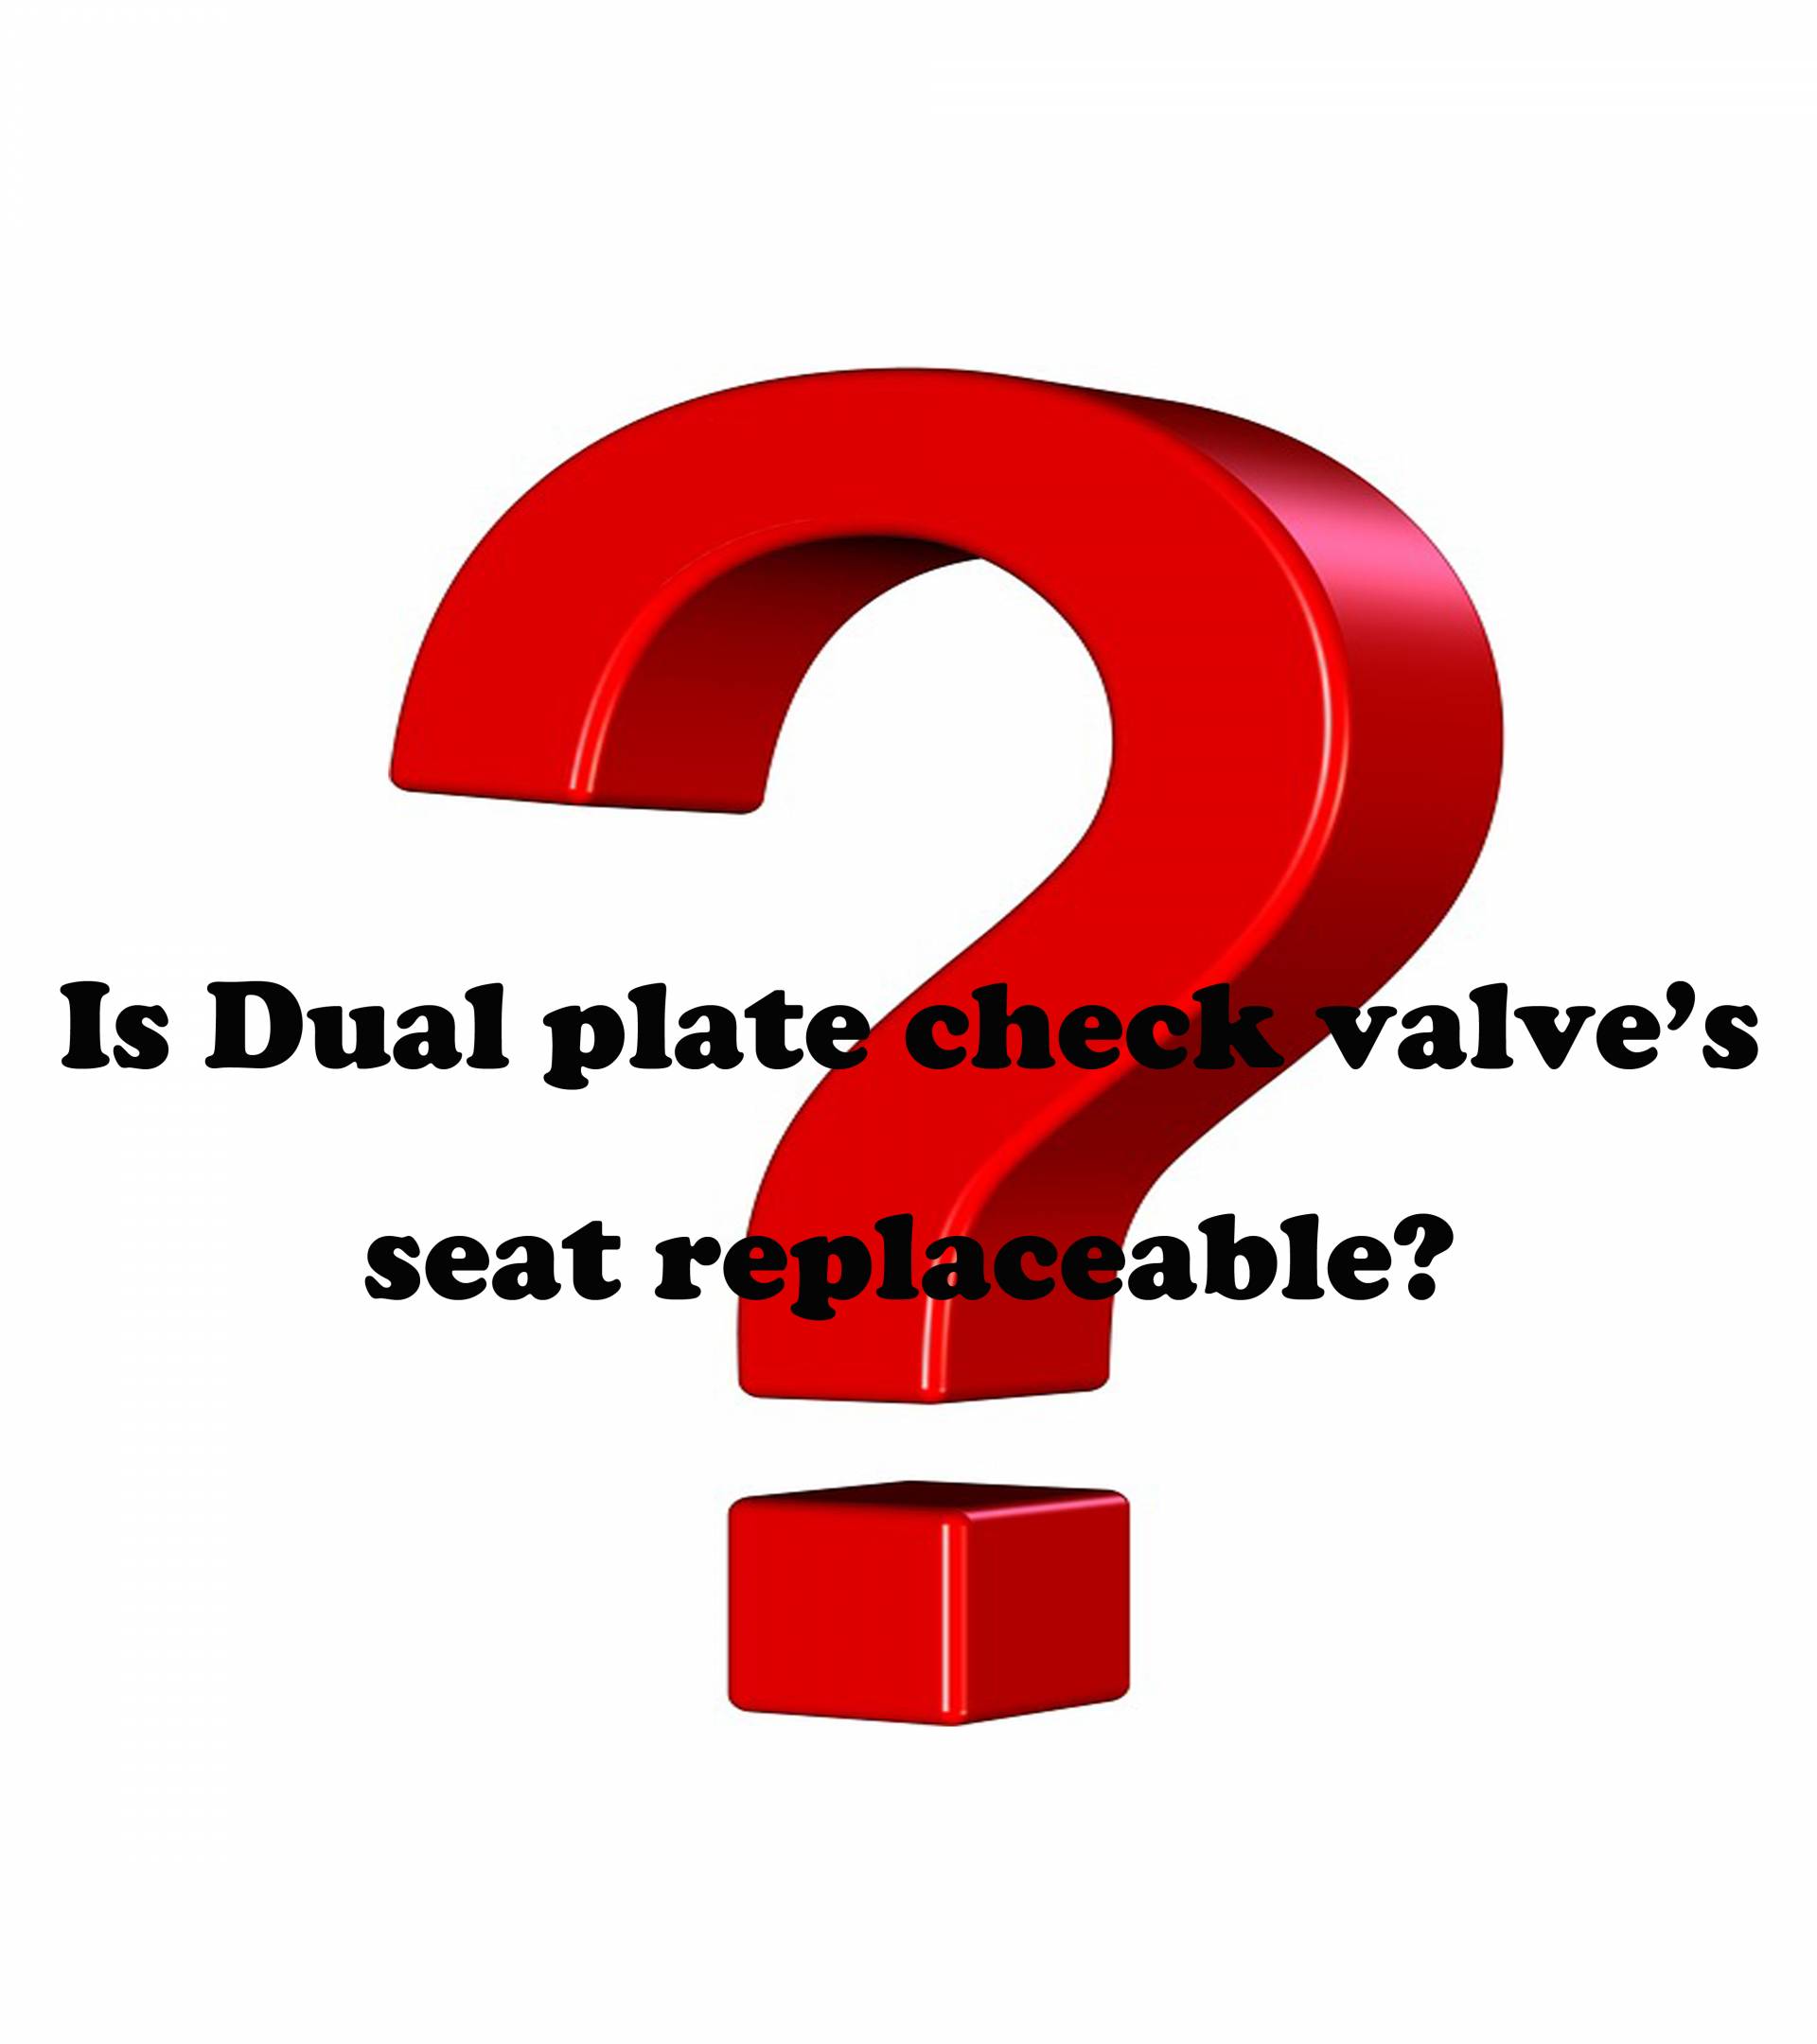 Is Dual plate check valve’s seat replaceable?